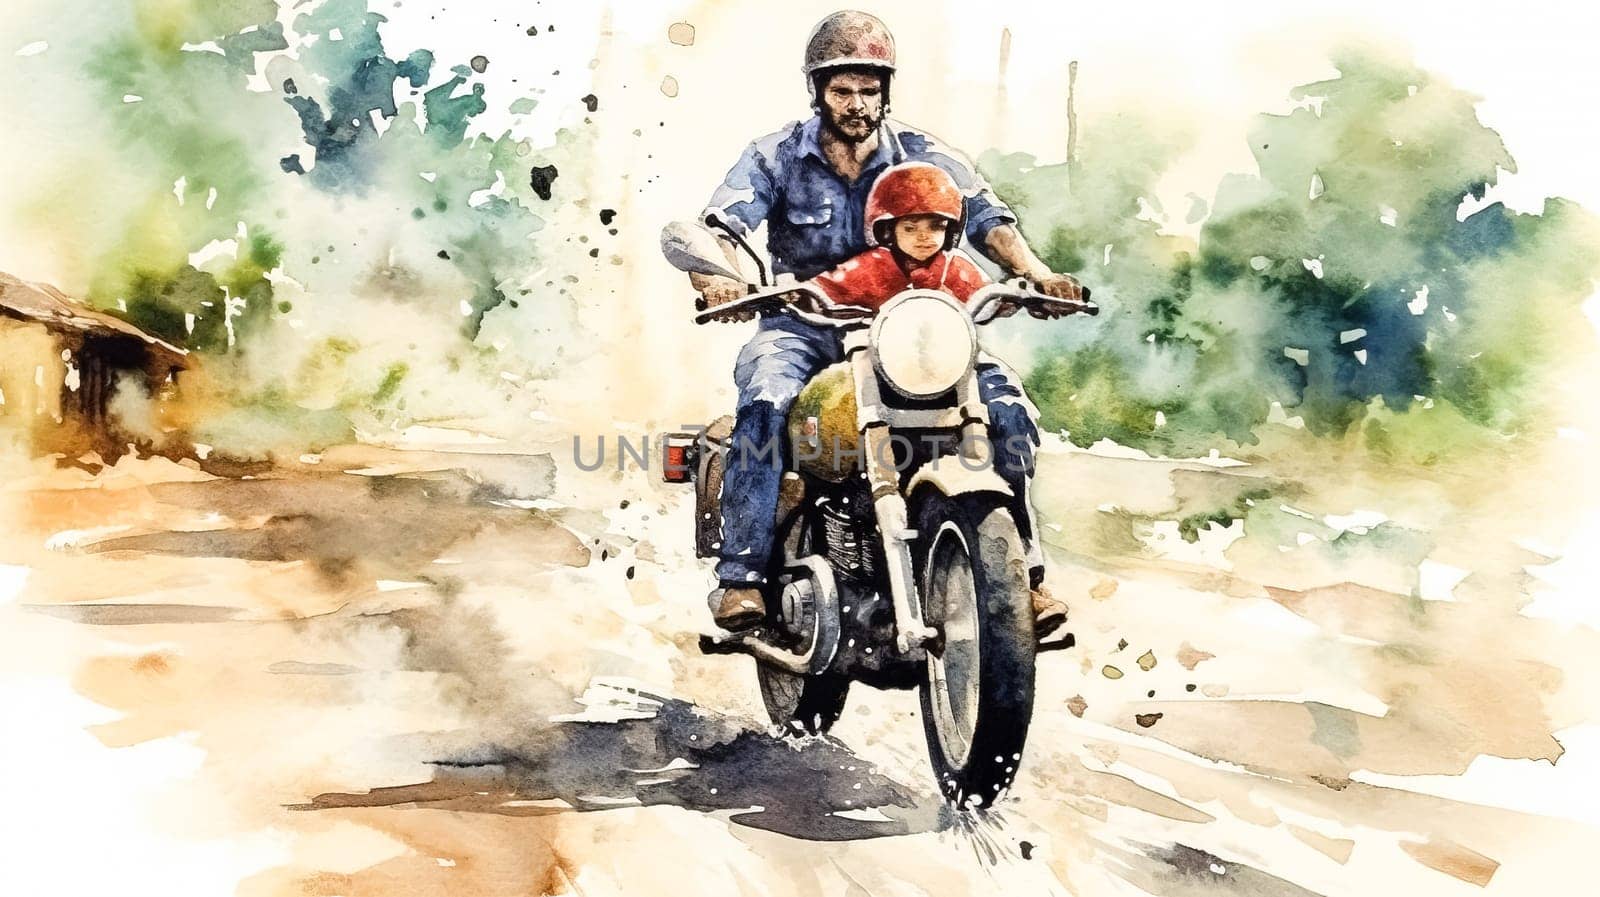 A man and a child are riding a motorcycle on a dirt road. The man is wearing a helmet and the child is wearing a helmet as well. happy father's day concept